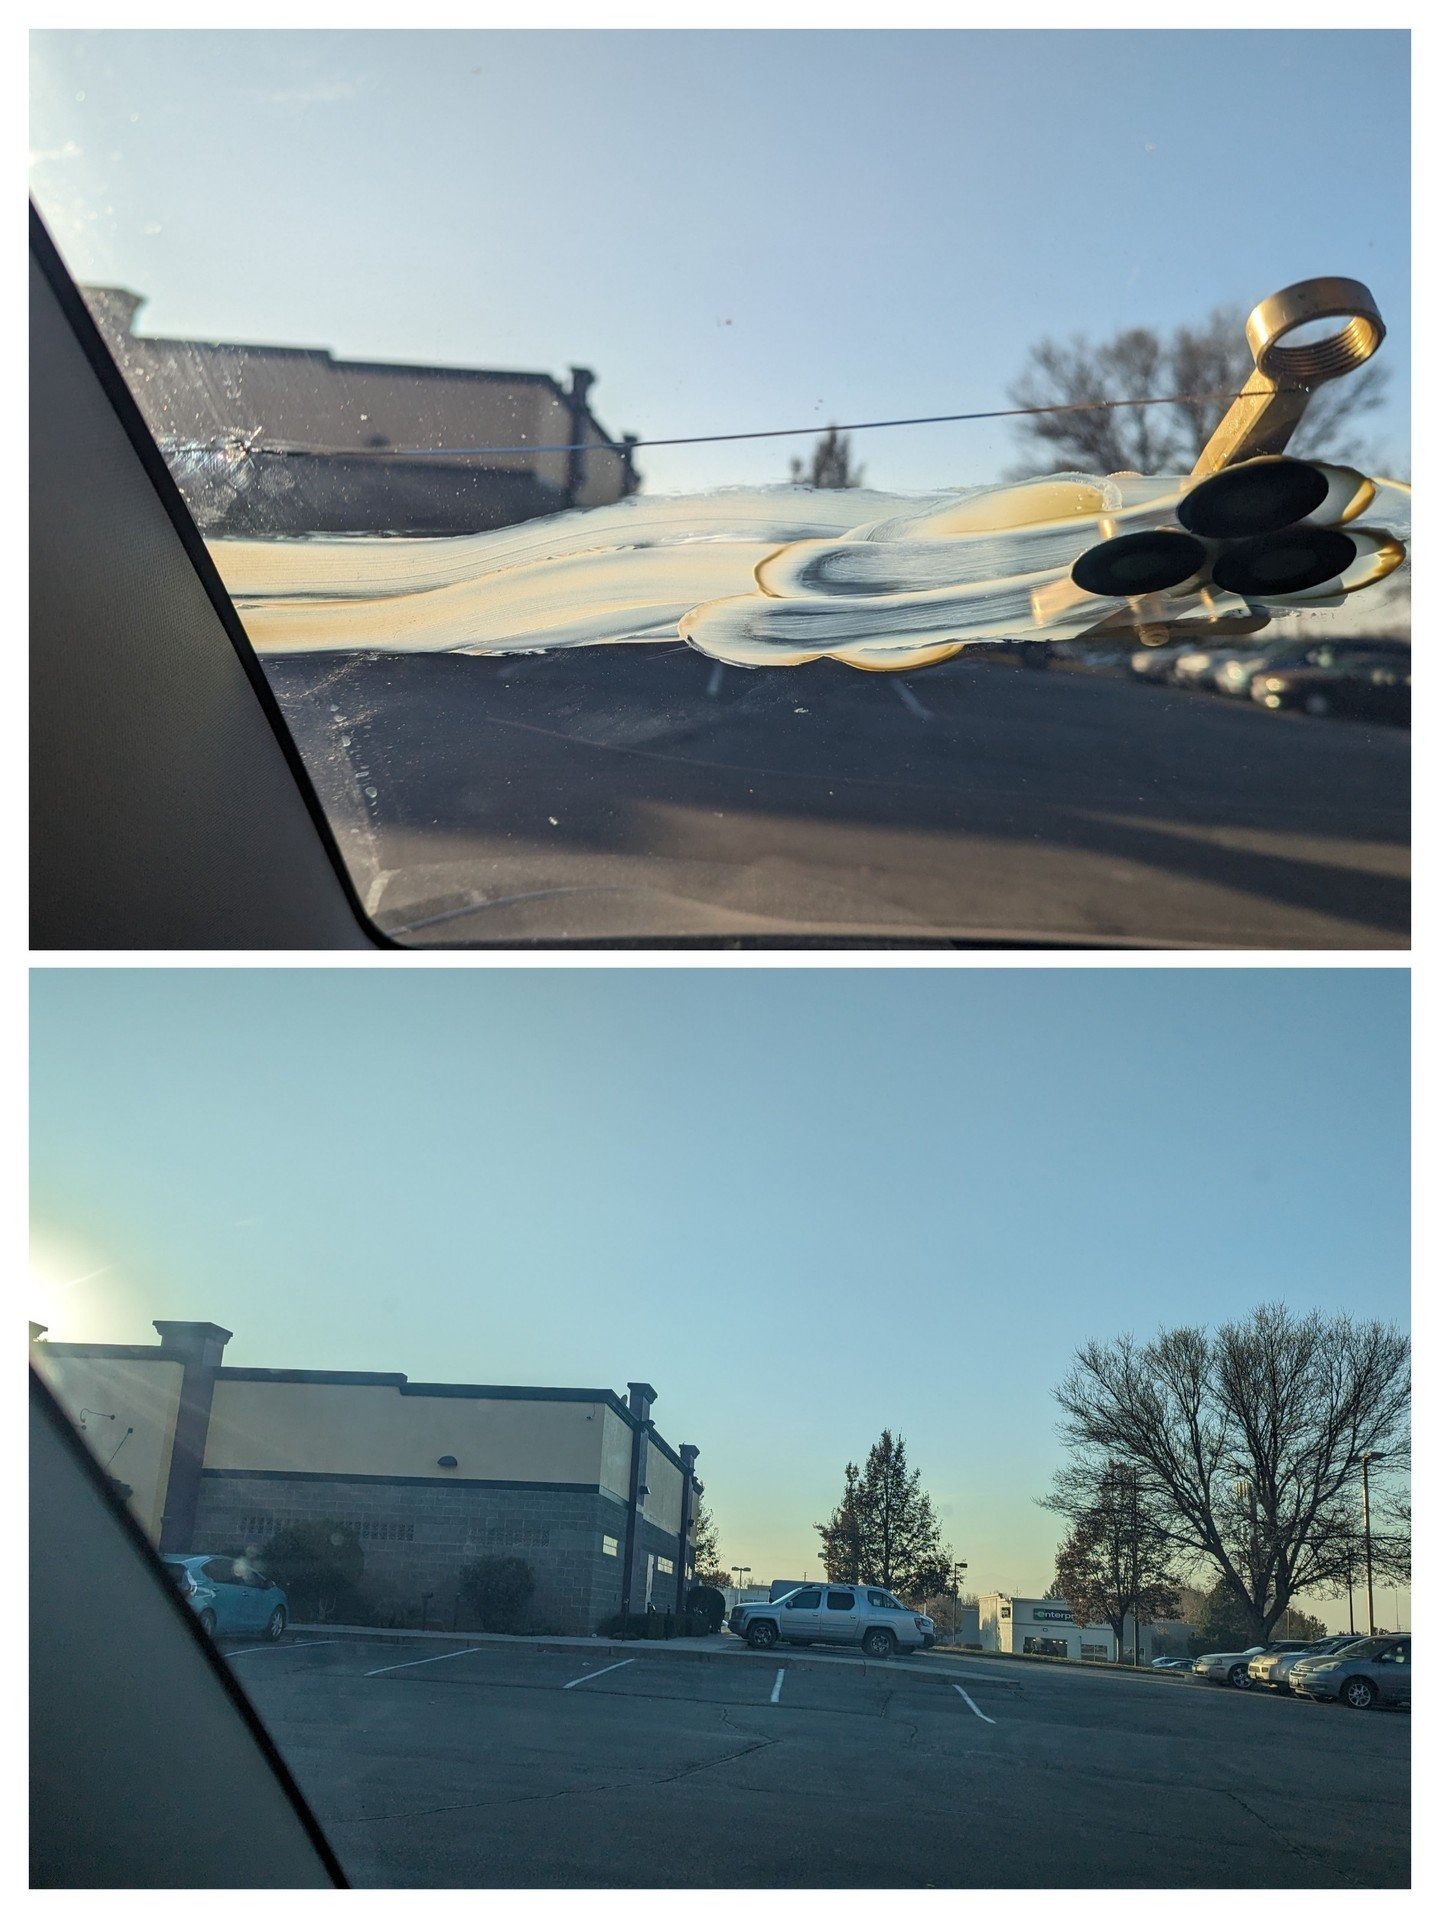 Doing a 12-in crack repair on a Tesla. The picture shows before and after the repair. We specialize in repairing windshields. We save windshields from replacement.

We make it simple, convenient and affordable for our customers getting their windshie